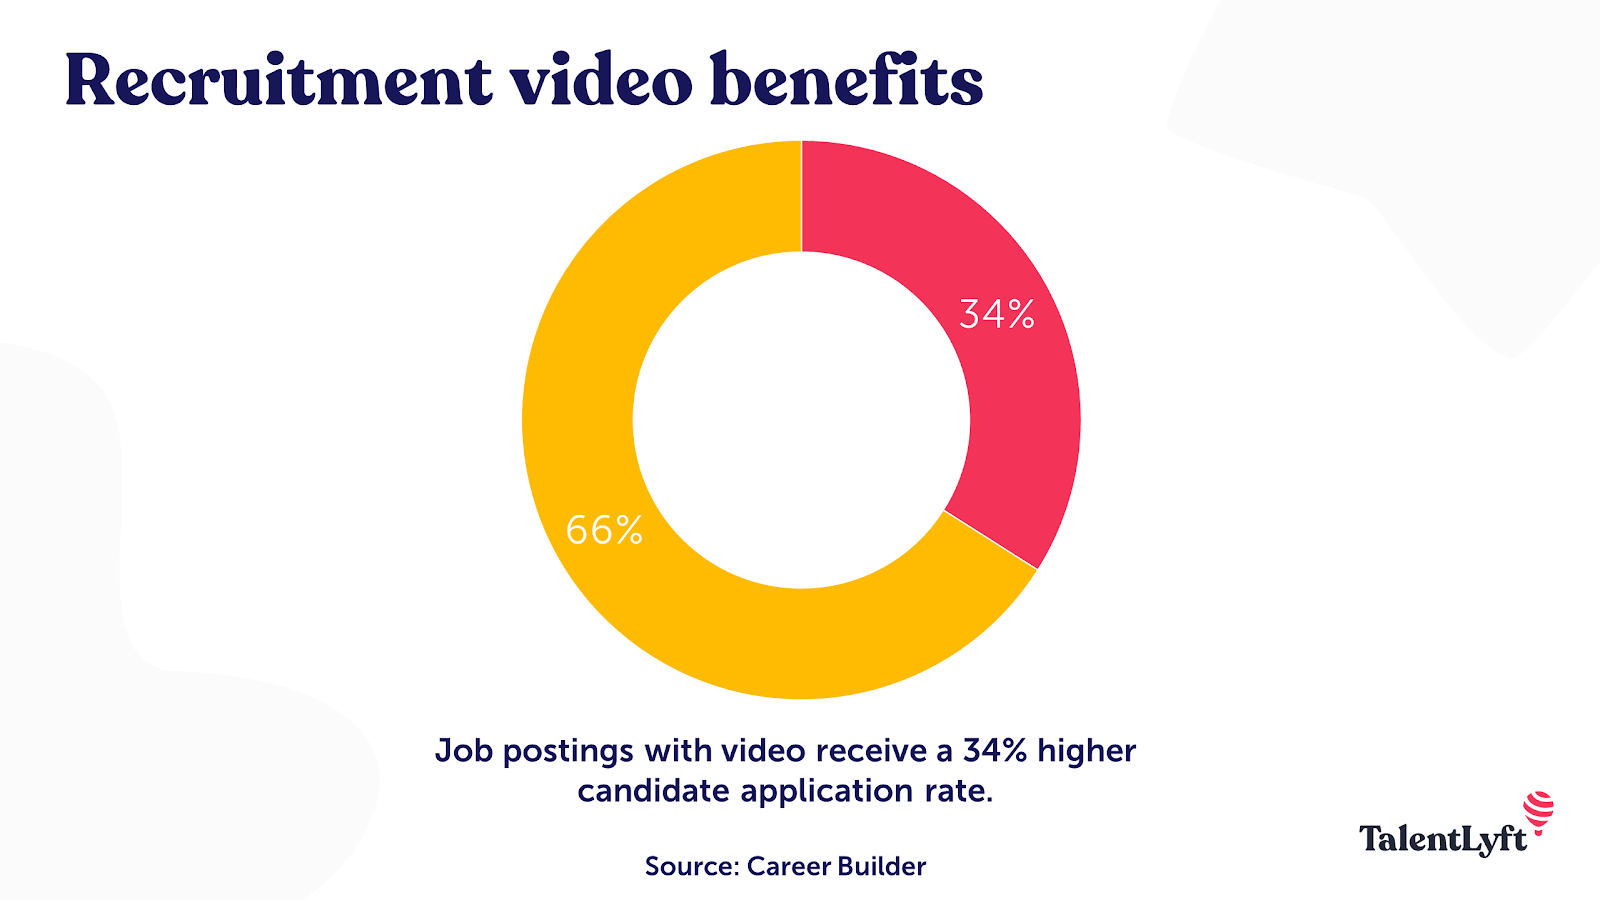 Why should you use video in recruitment?